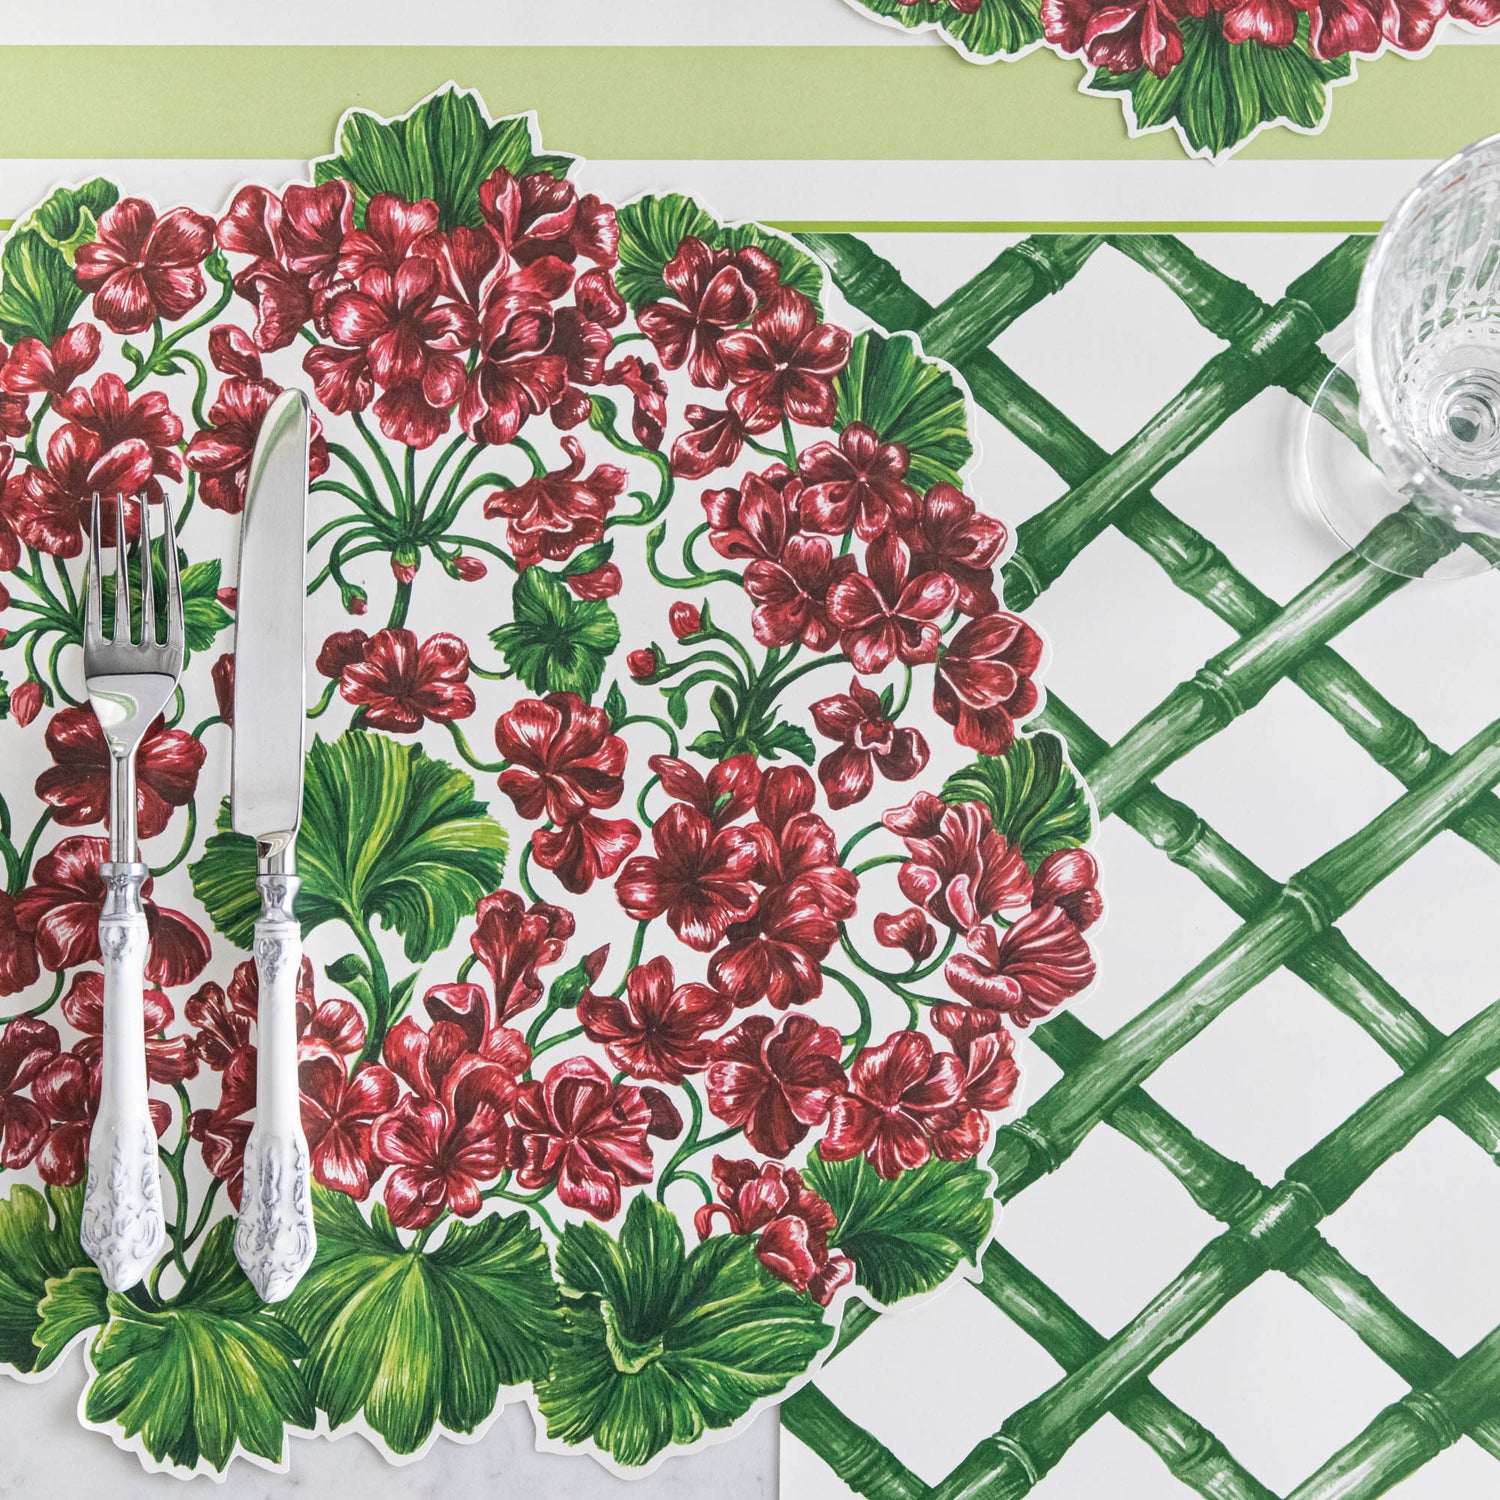 The Green Lattice Placemat under an elegant place setting, from above.